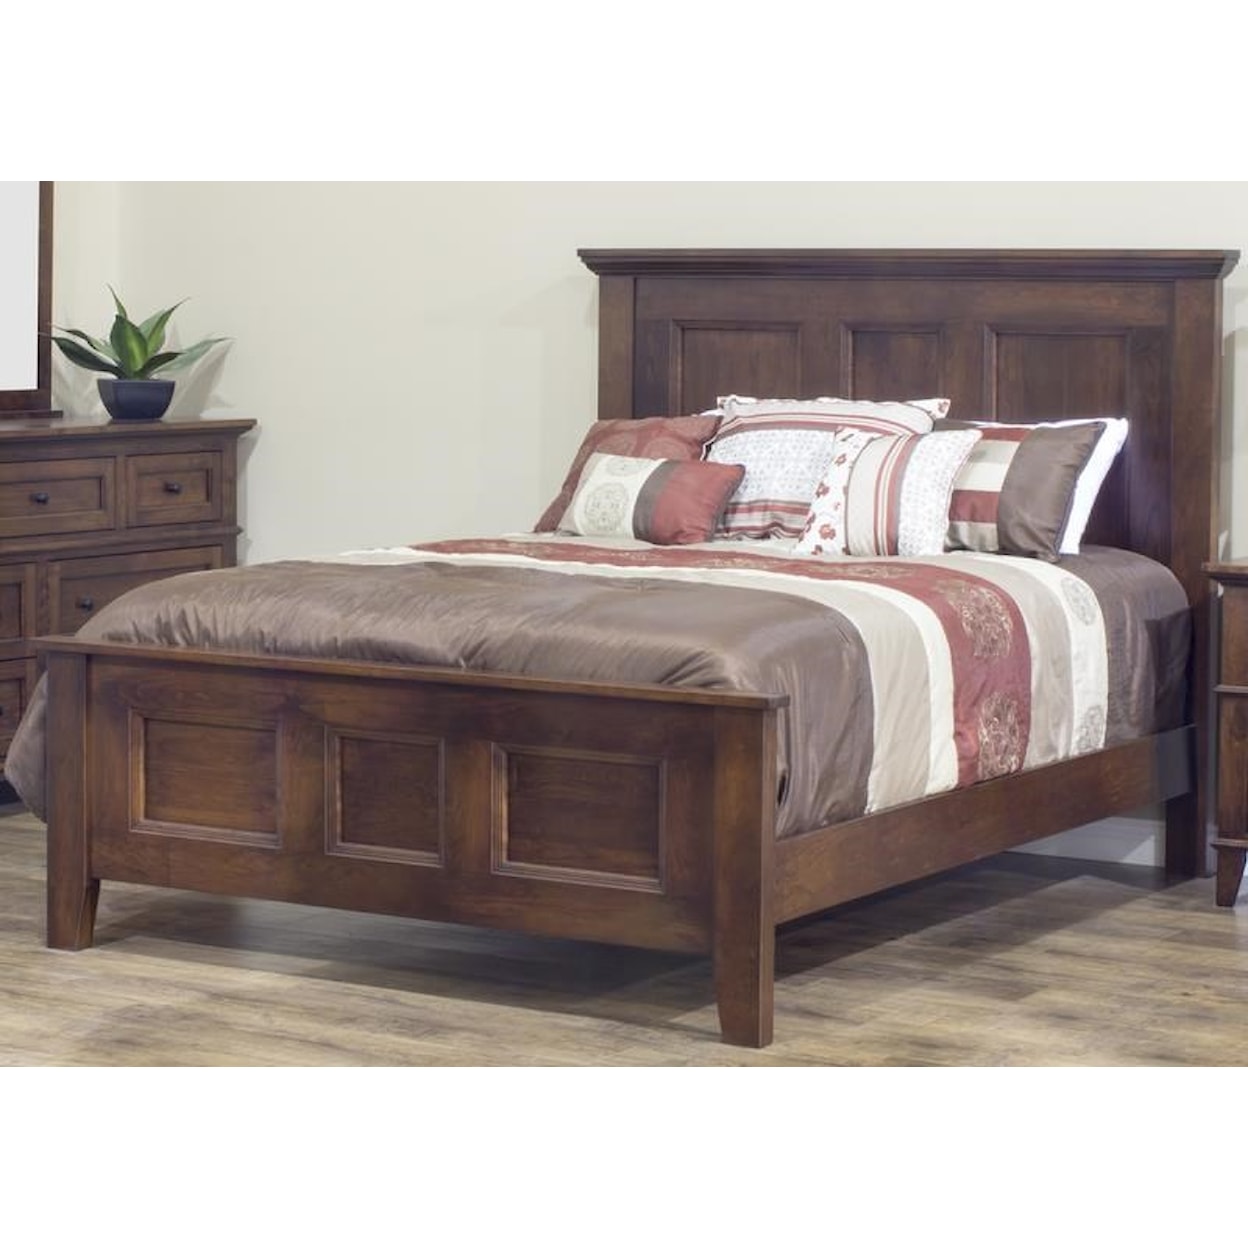 L.J. Gascho Furniture Brentwood Brentwood King Bed